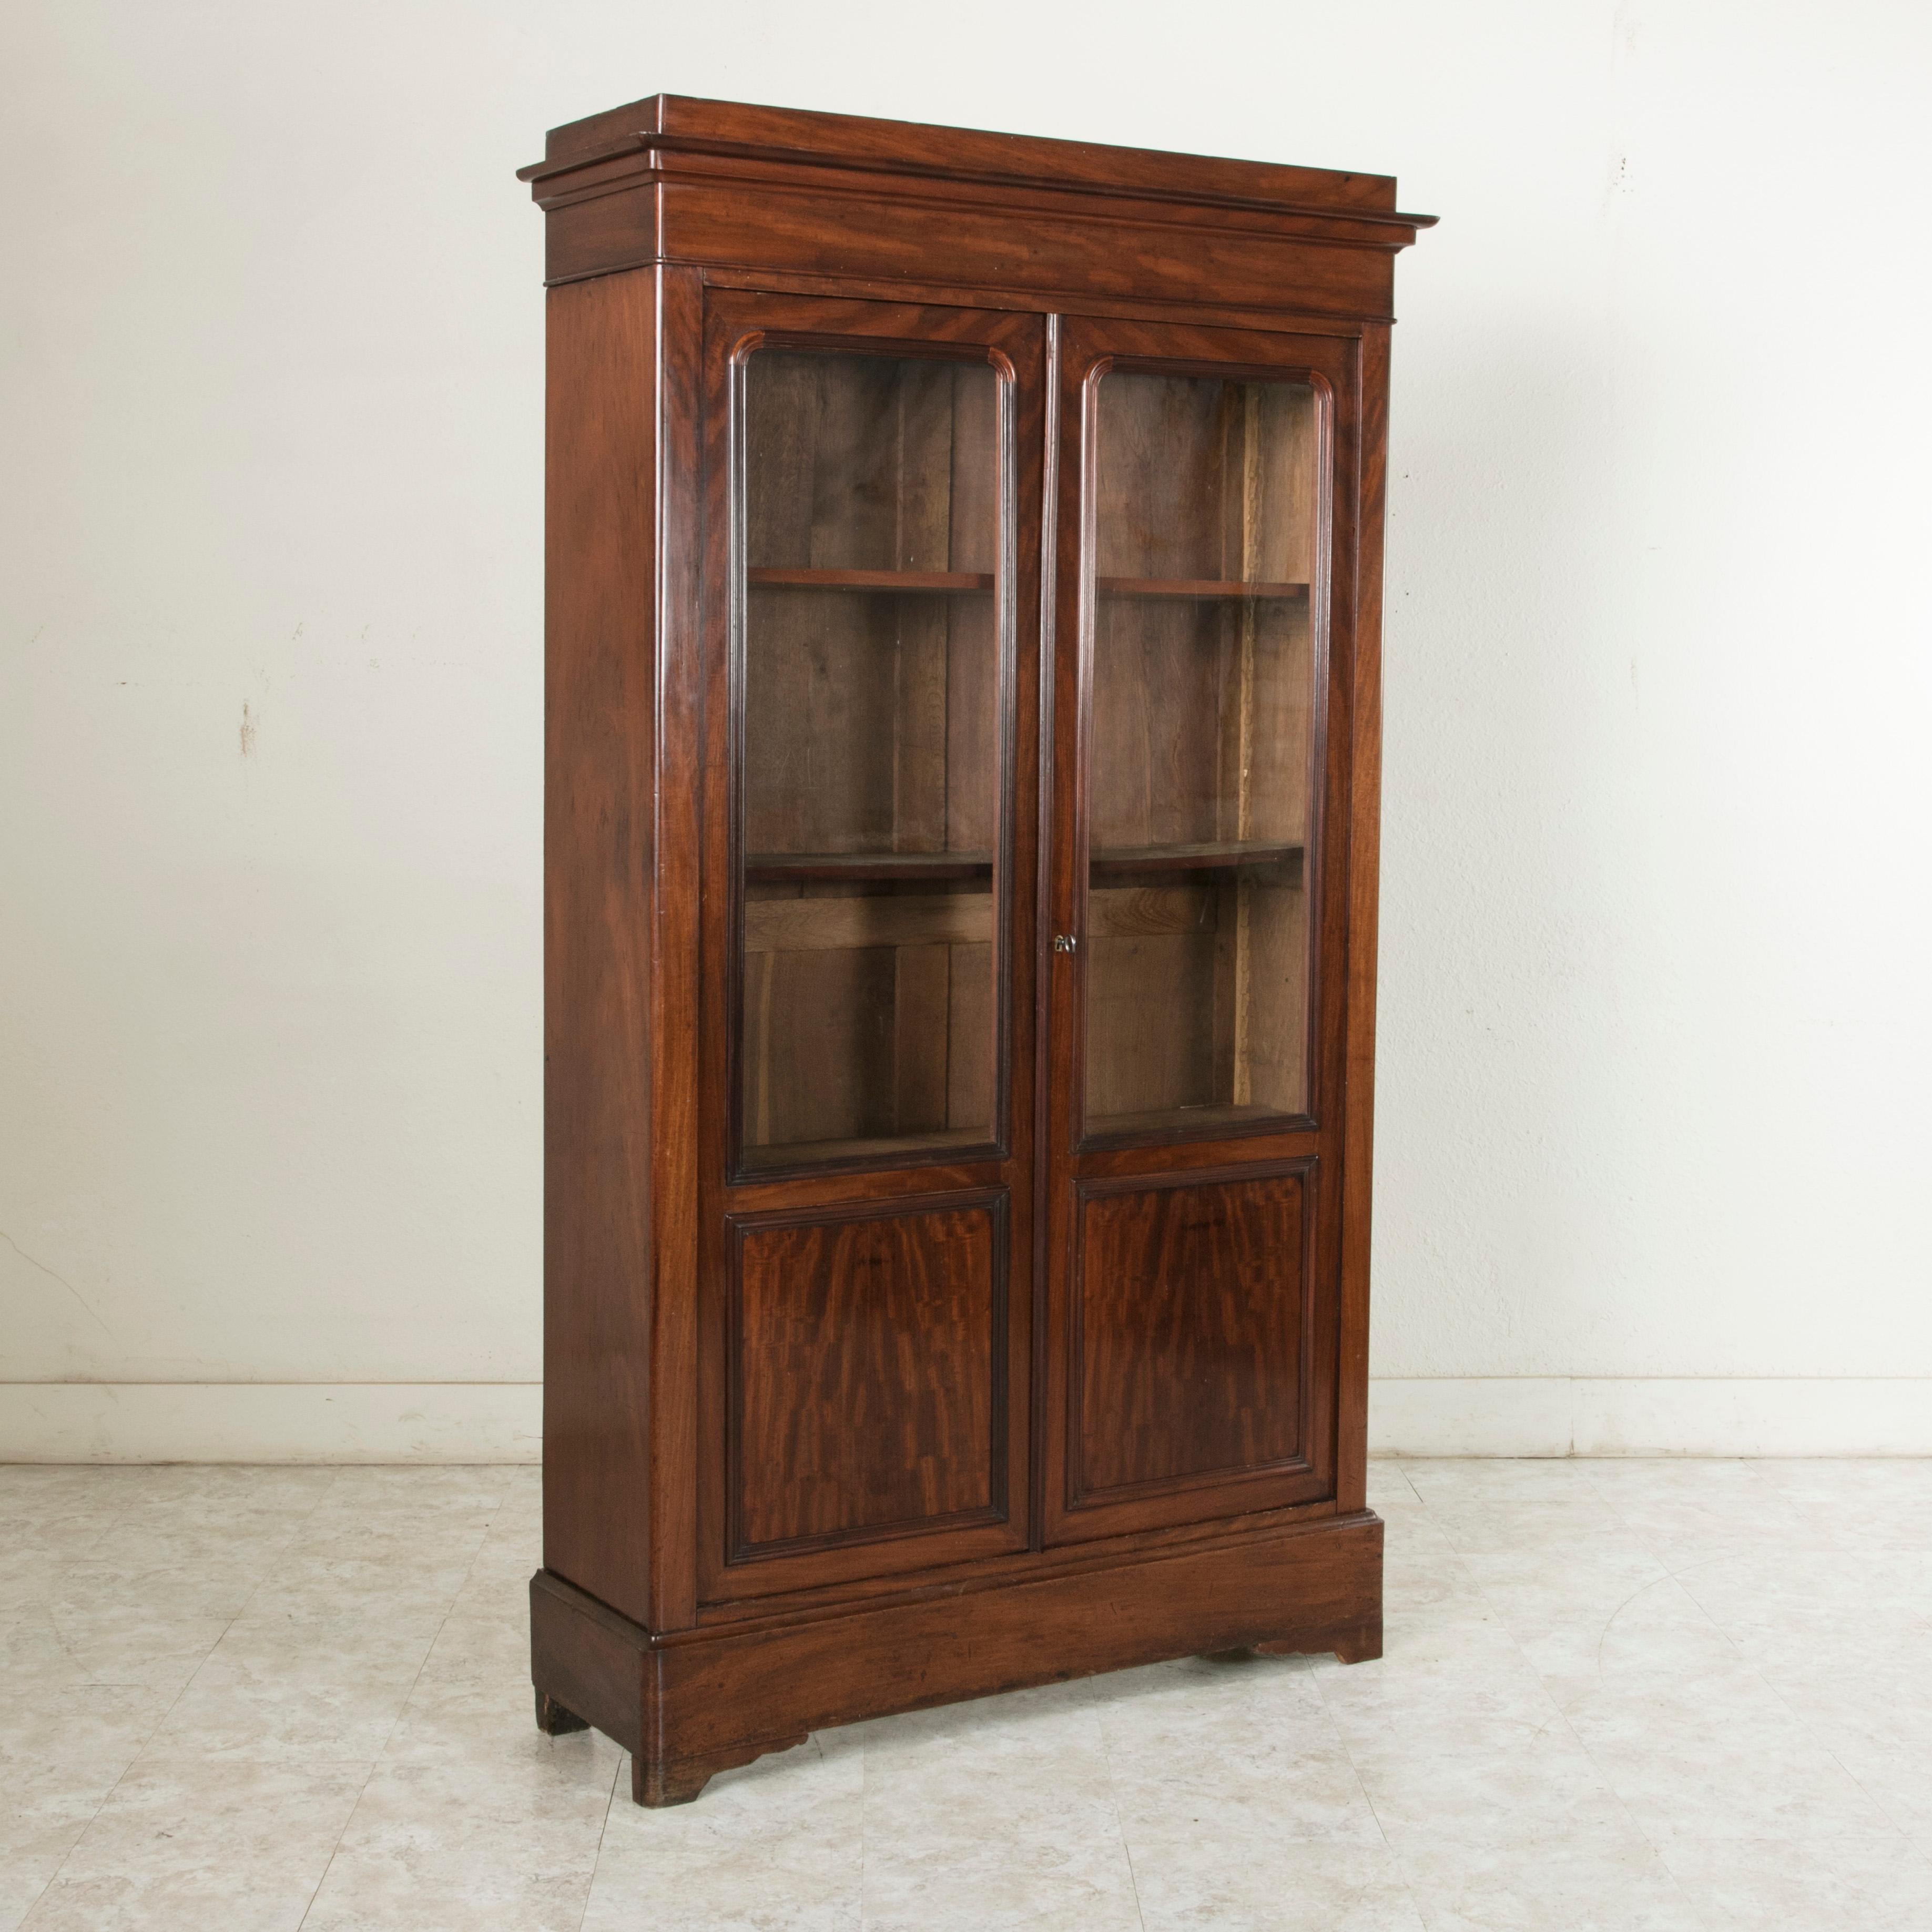 This 19th century Louis Philippe period bookcase or vitrine features a mahogany facade with simple, handsome lines and two doors inset with their original hand blown glass. It has three adjustable interior shelves for ample storage and display